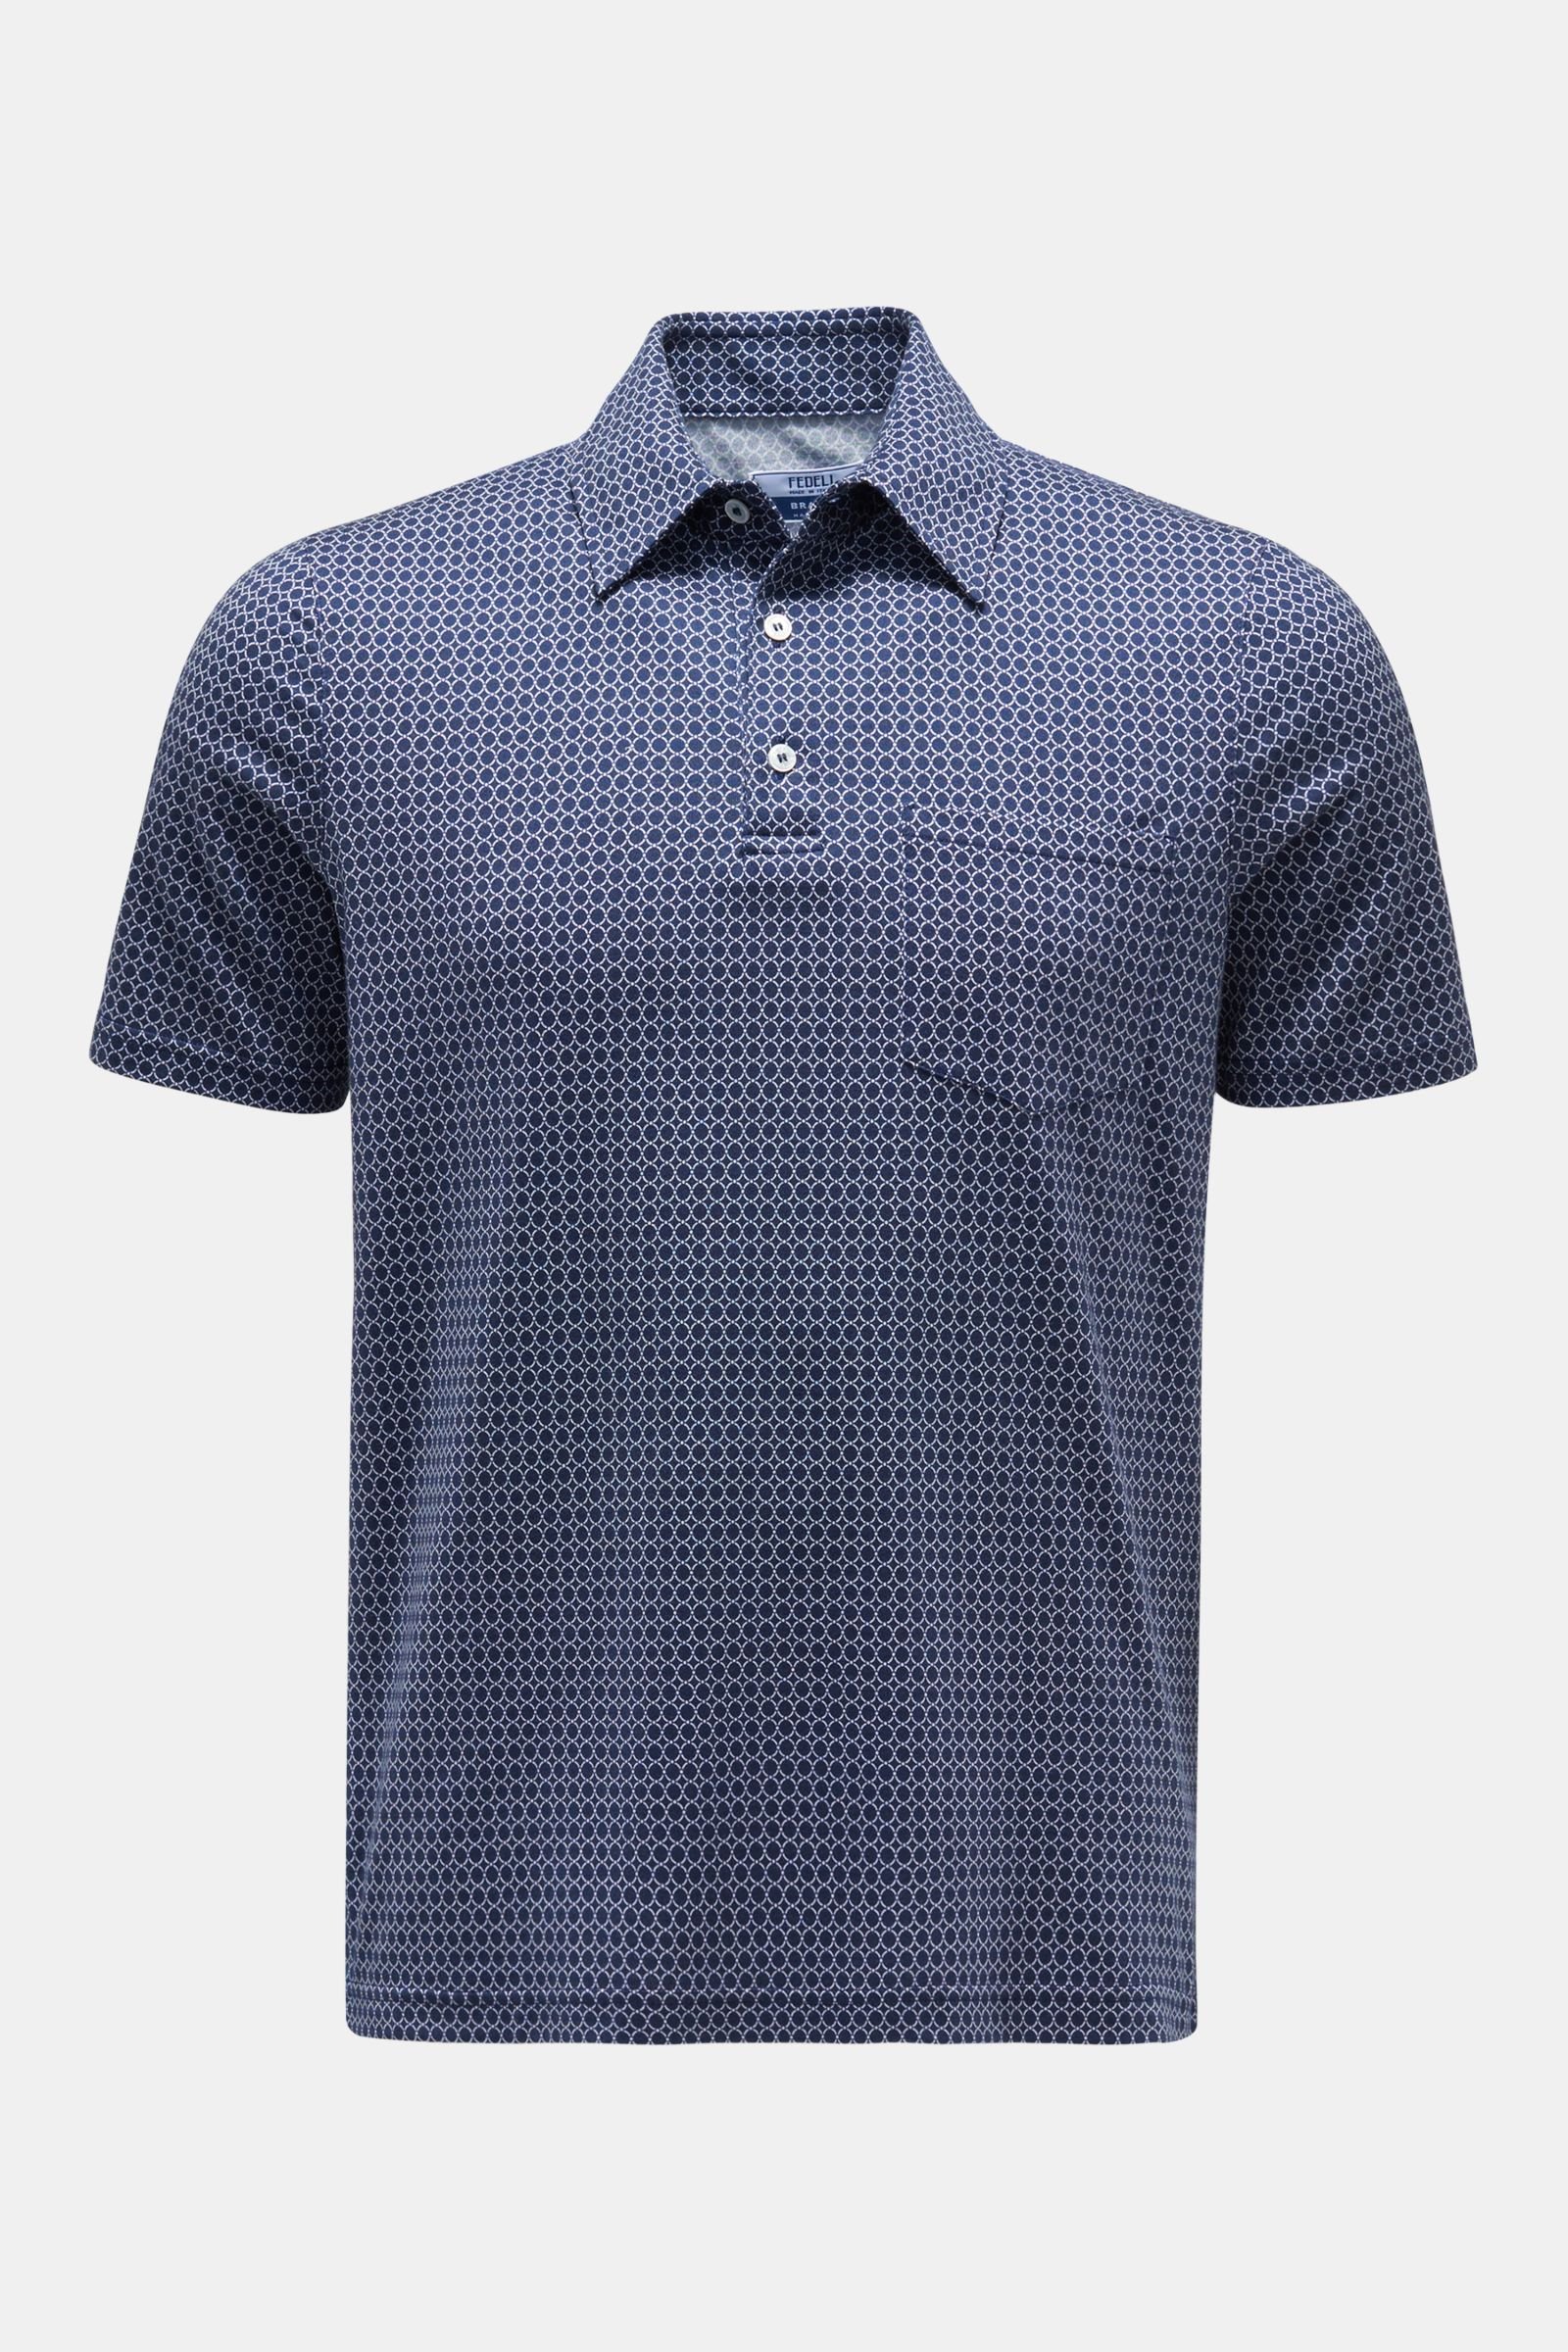 Jersey polo shirt 'Bell' navy/white patterned